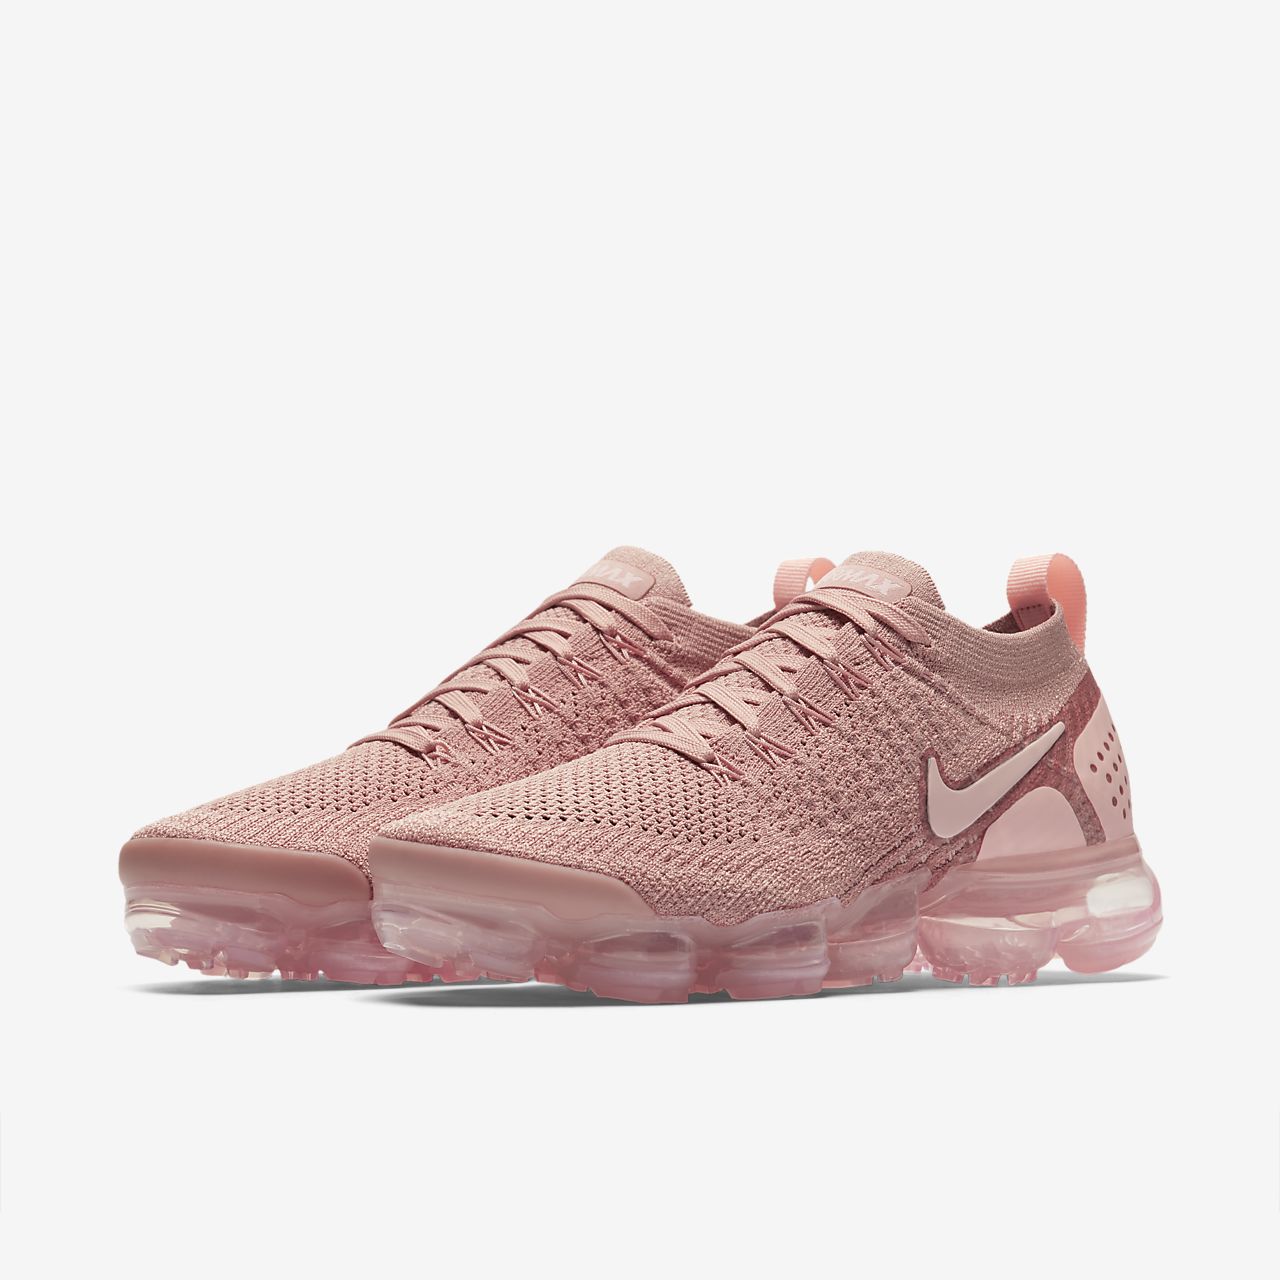 rust pink nike shoes